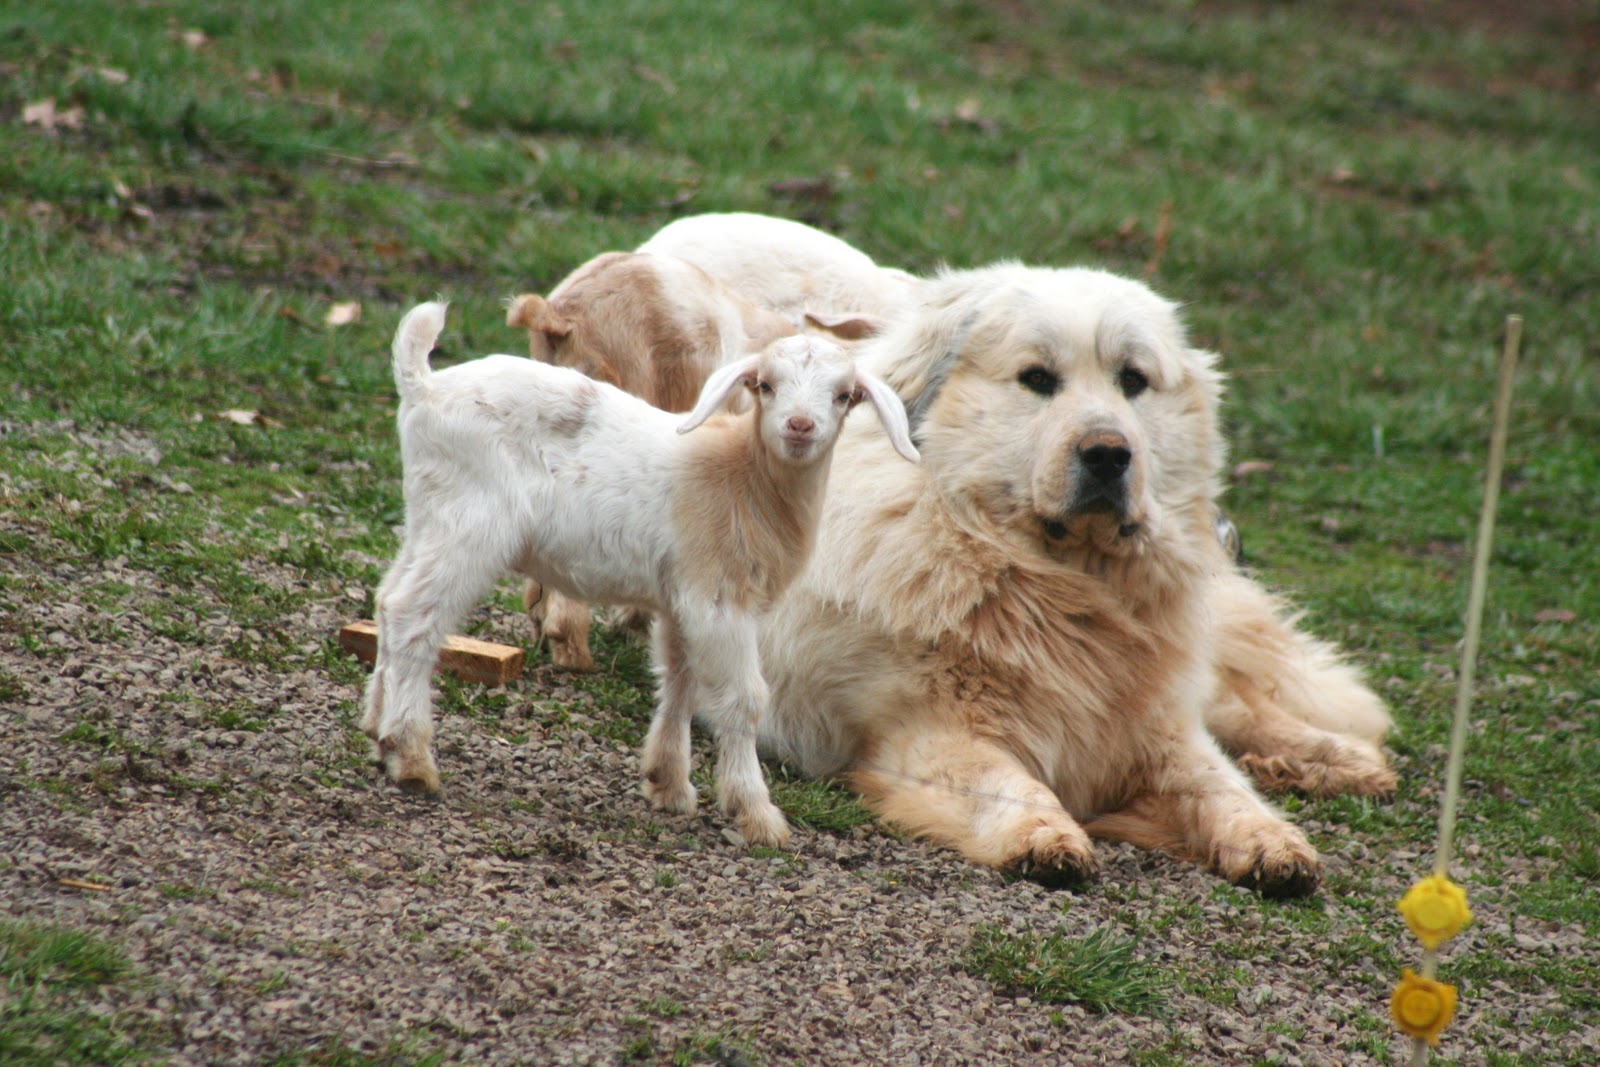 Hilltop Great Pyrenees: Our Breeding Pyrs